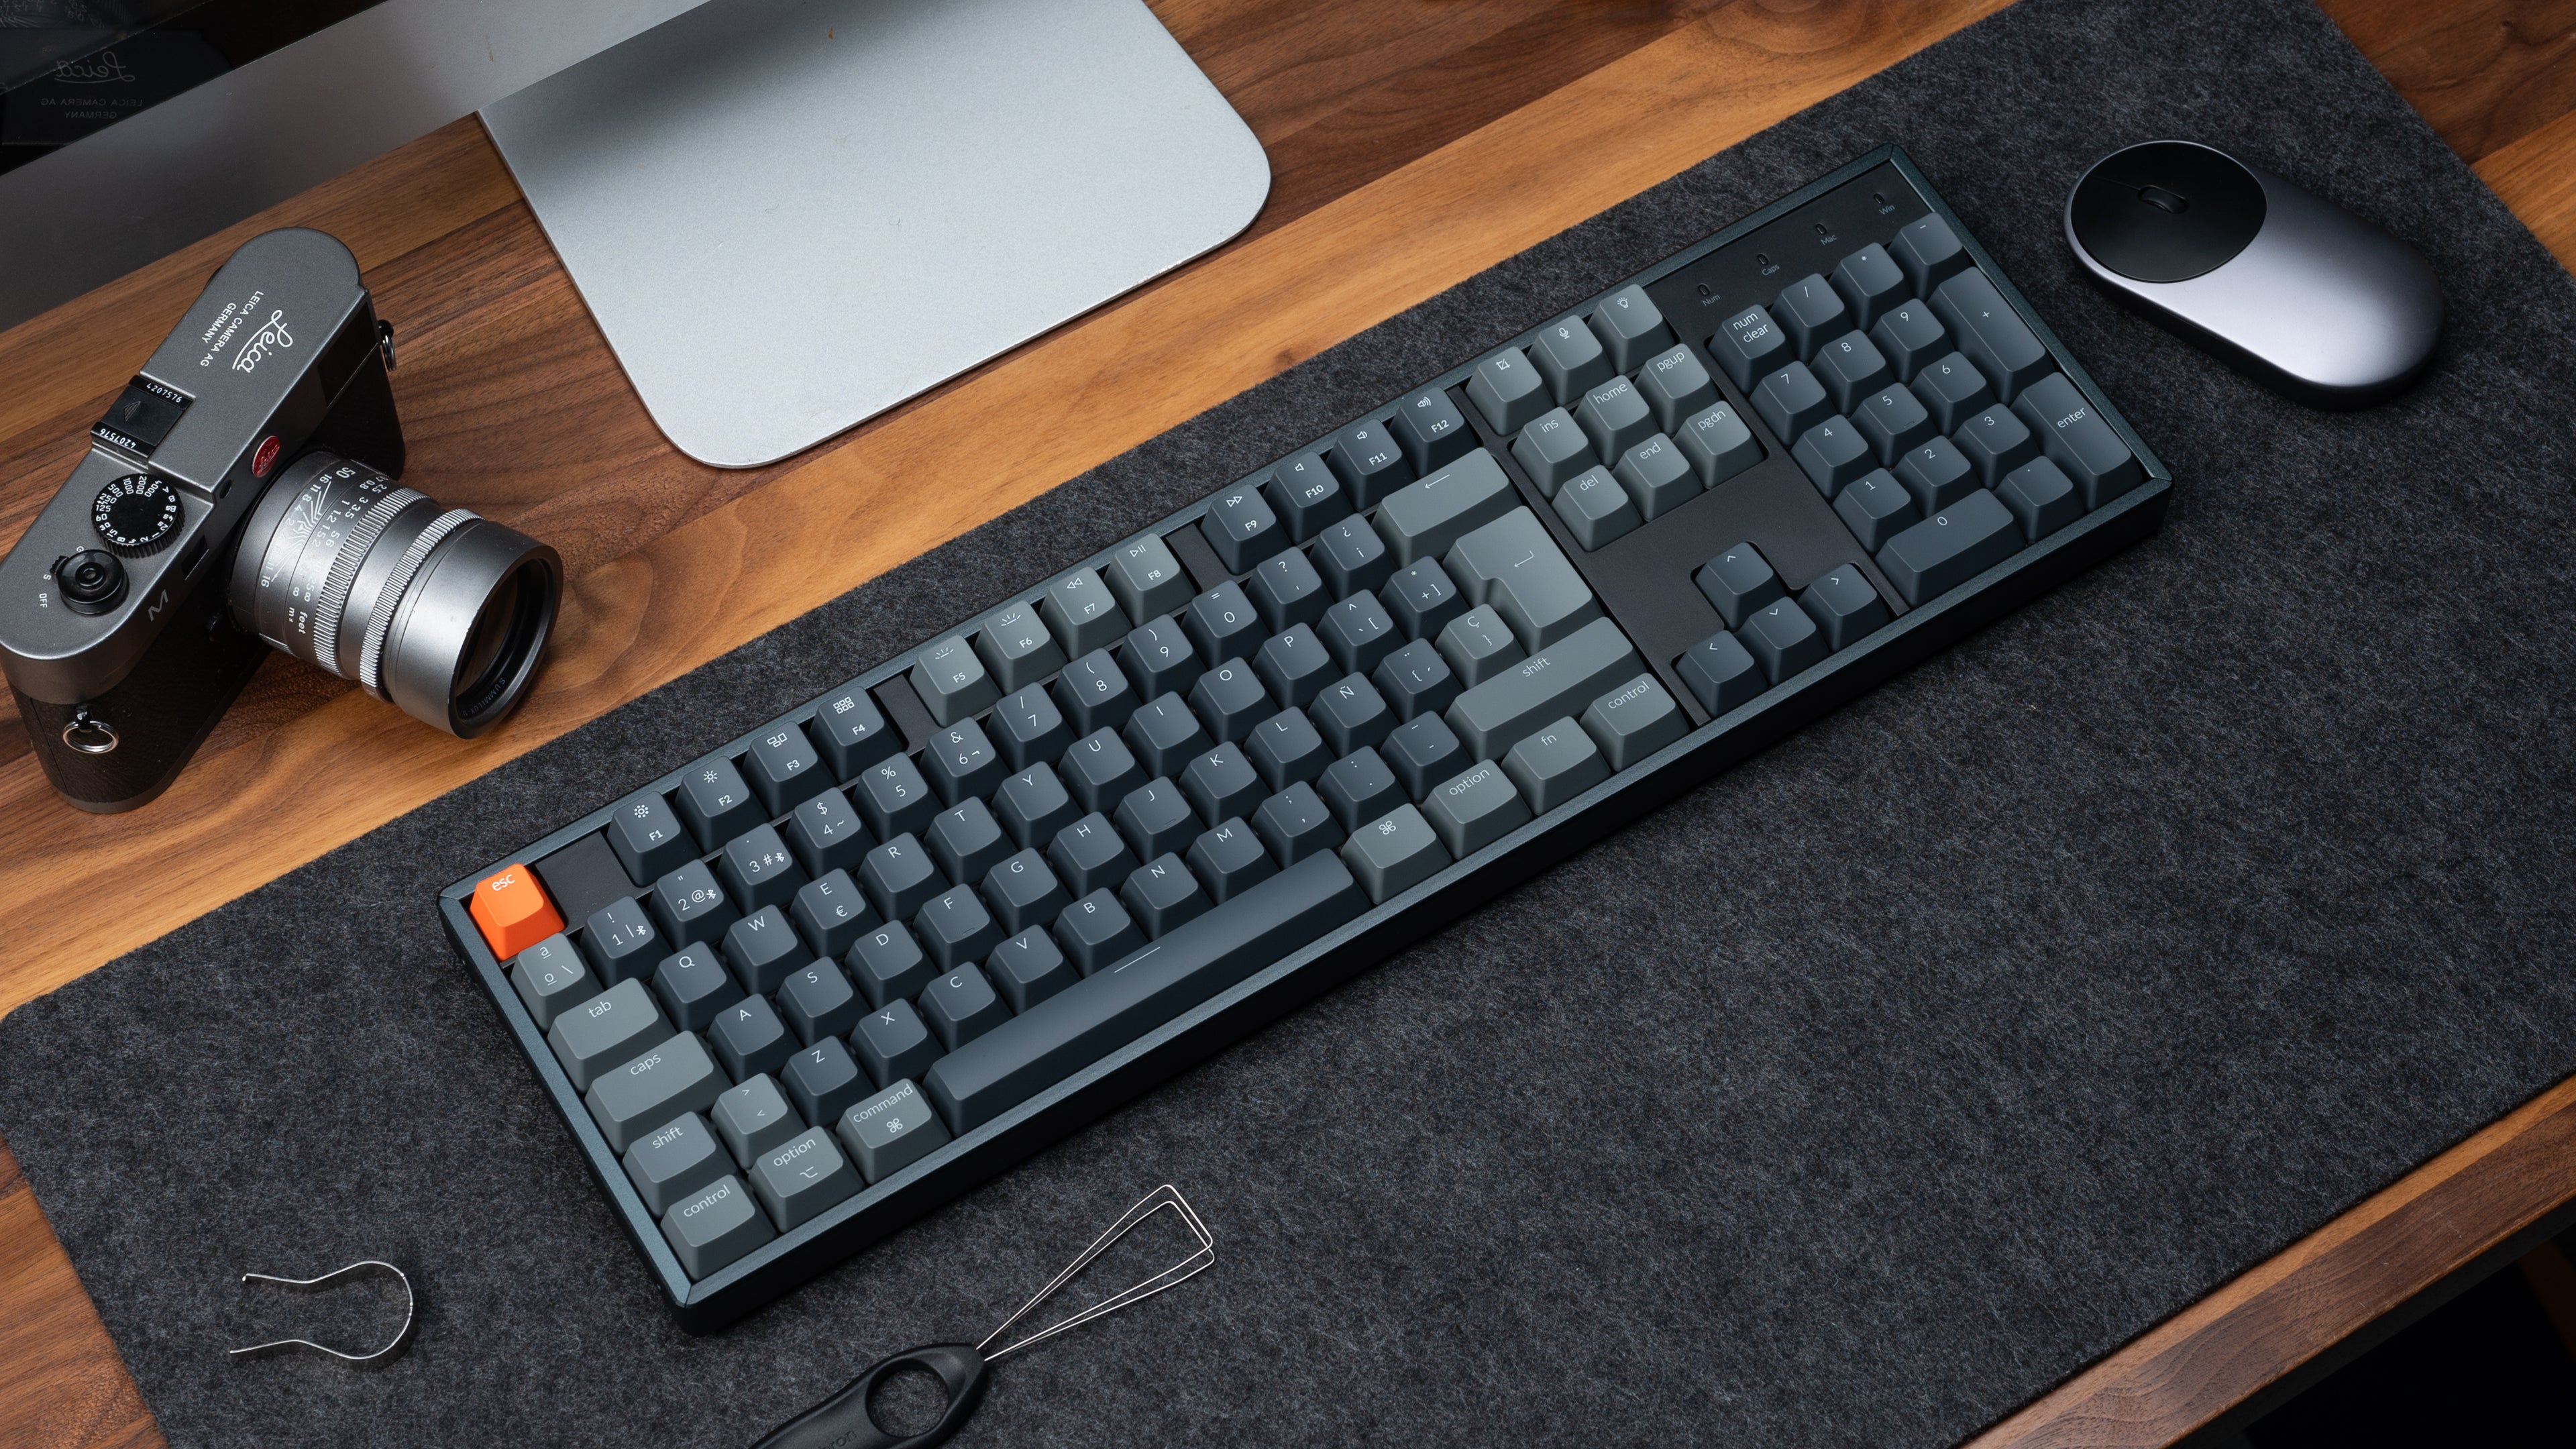 Keychron K10 full size wireless mechanical keyboard for Mac Windows - Gateron mechanical switch and LK optical switch cordless and type-c cable mode